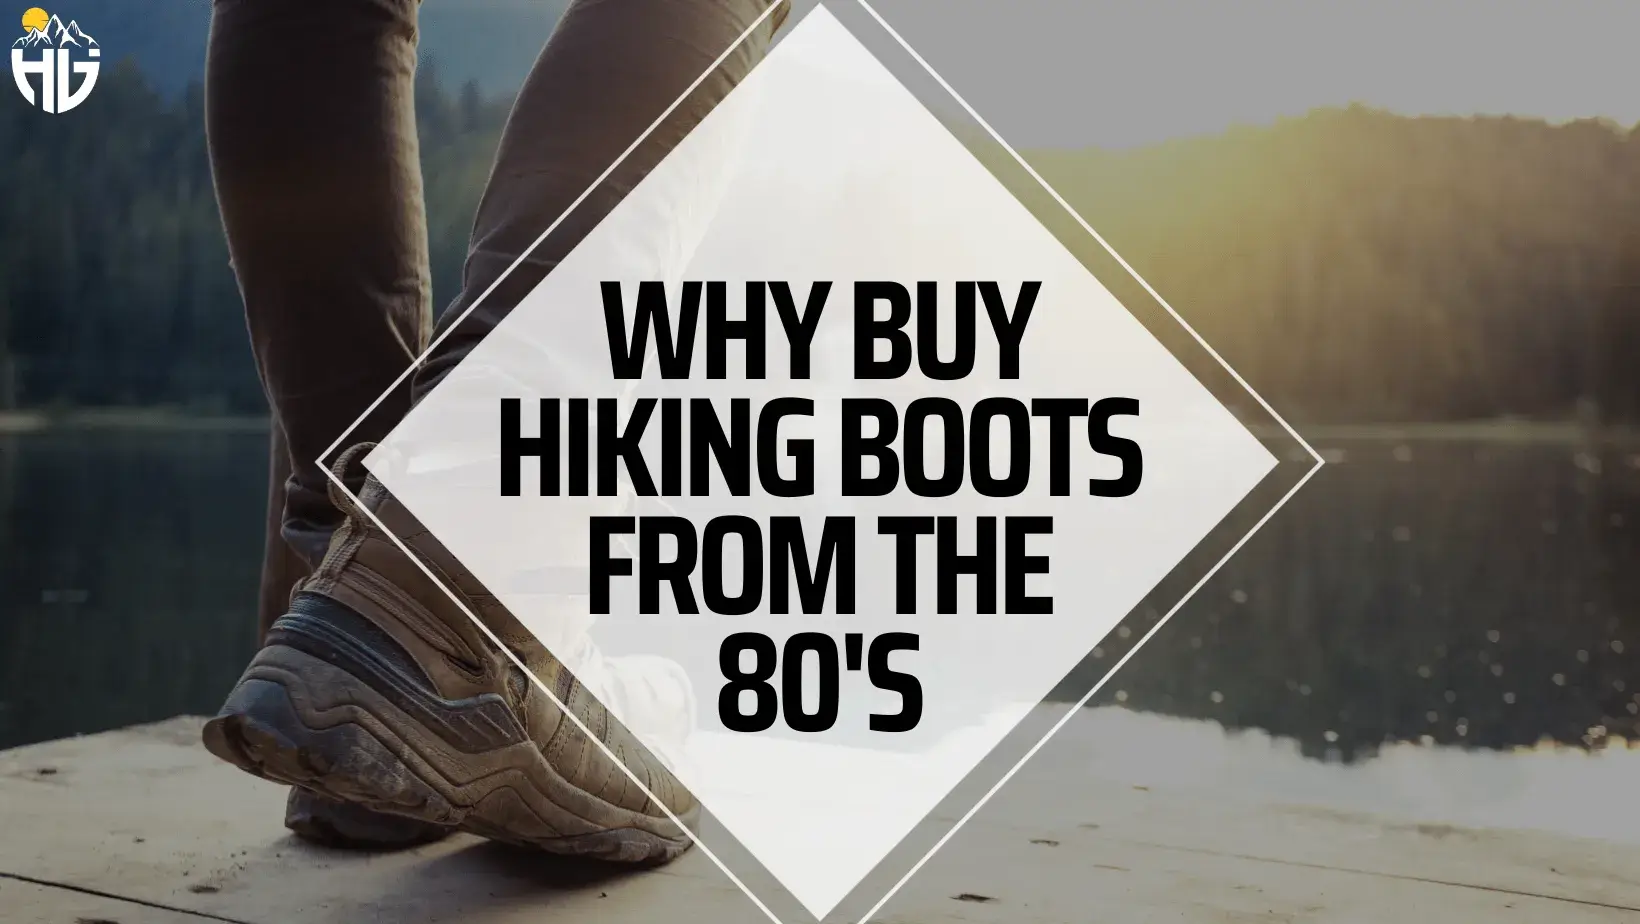 Why Buy Hiking Boots from the 80's